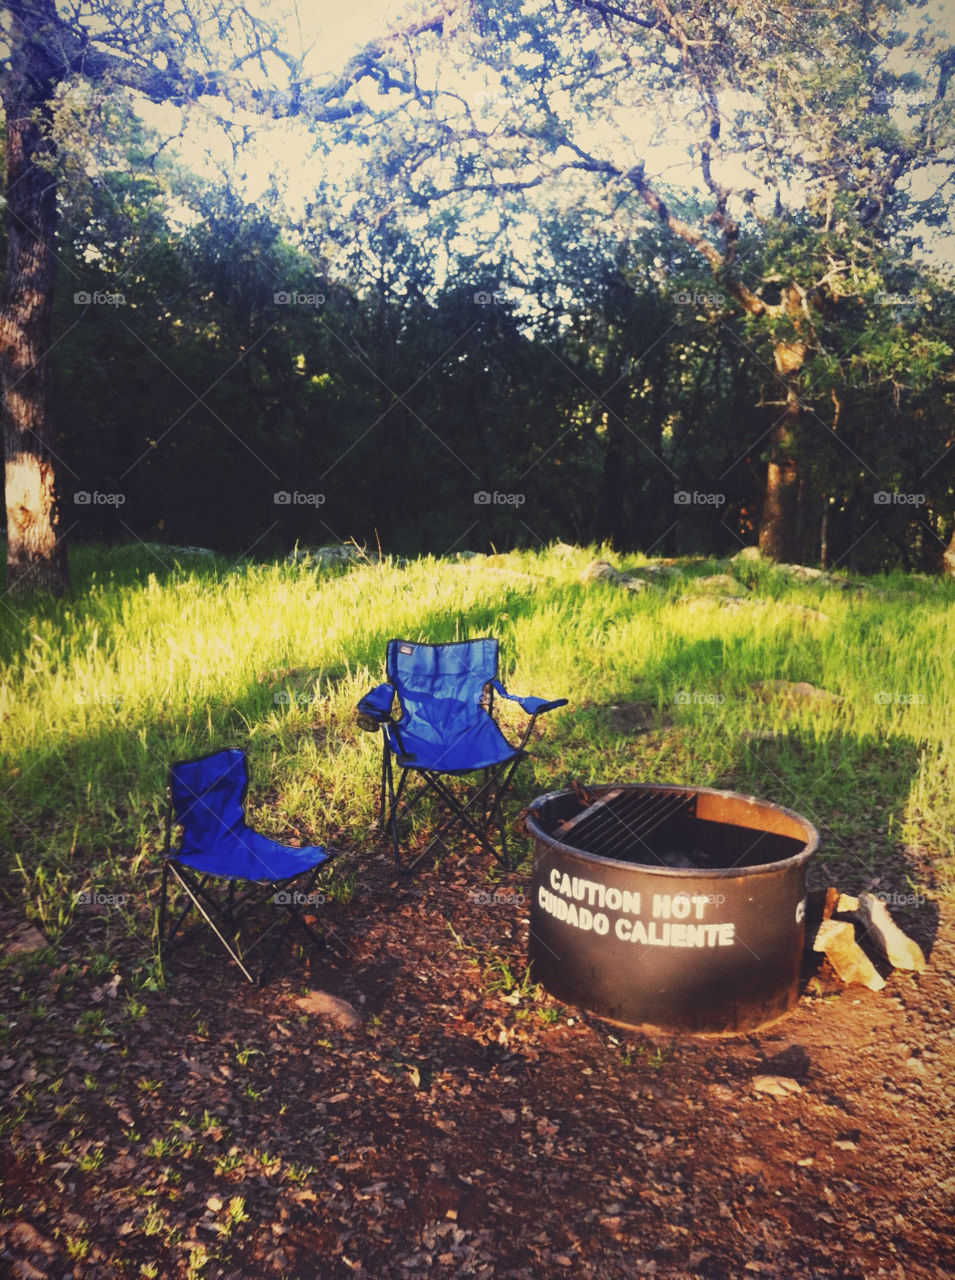 A small and large folding chair by a fire pit.